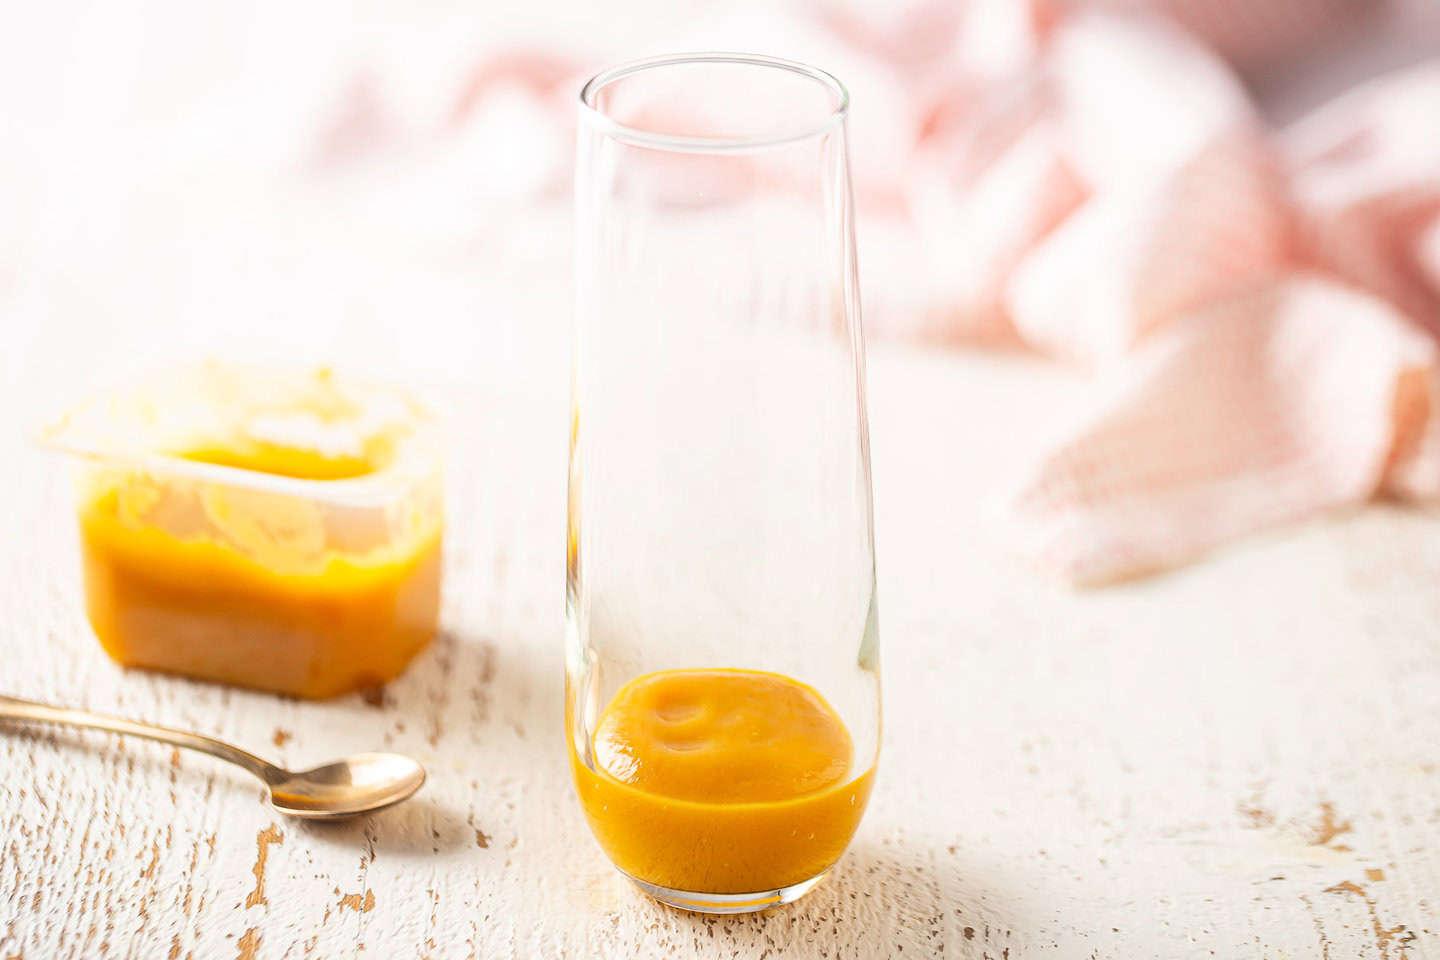 Peach puree in the bottom of a champagne flute.